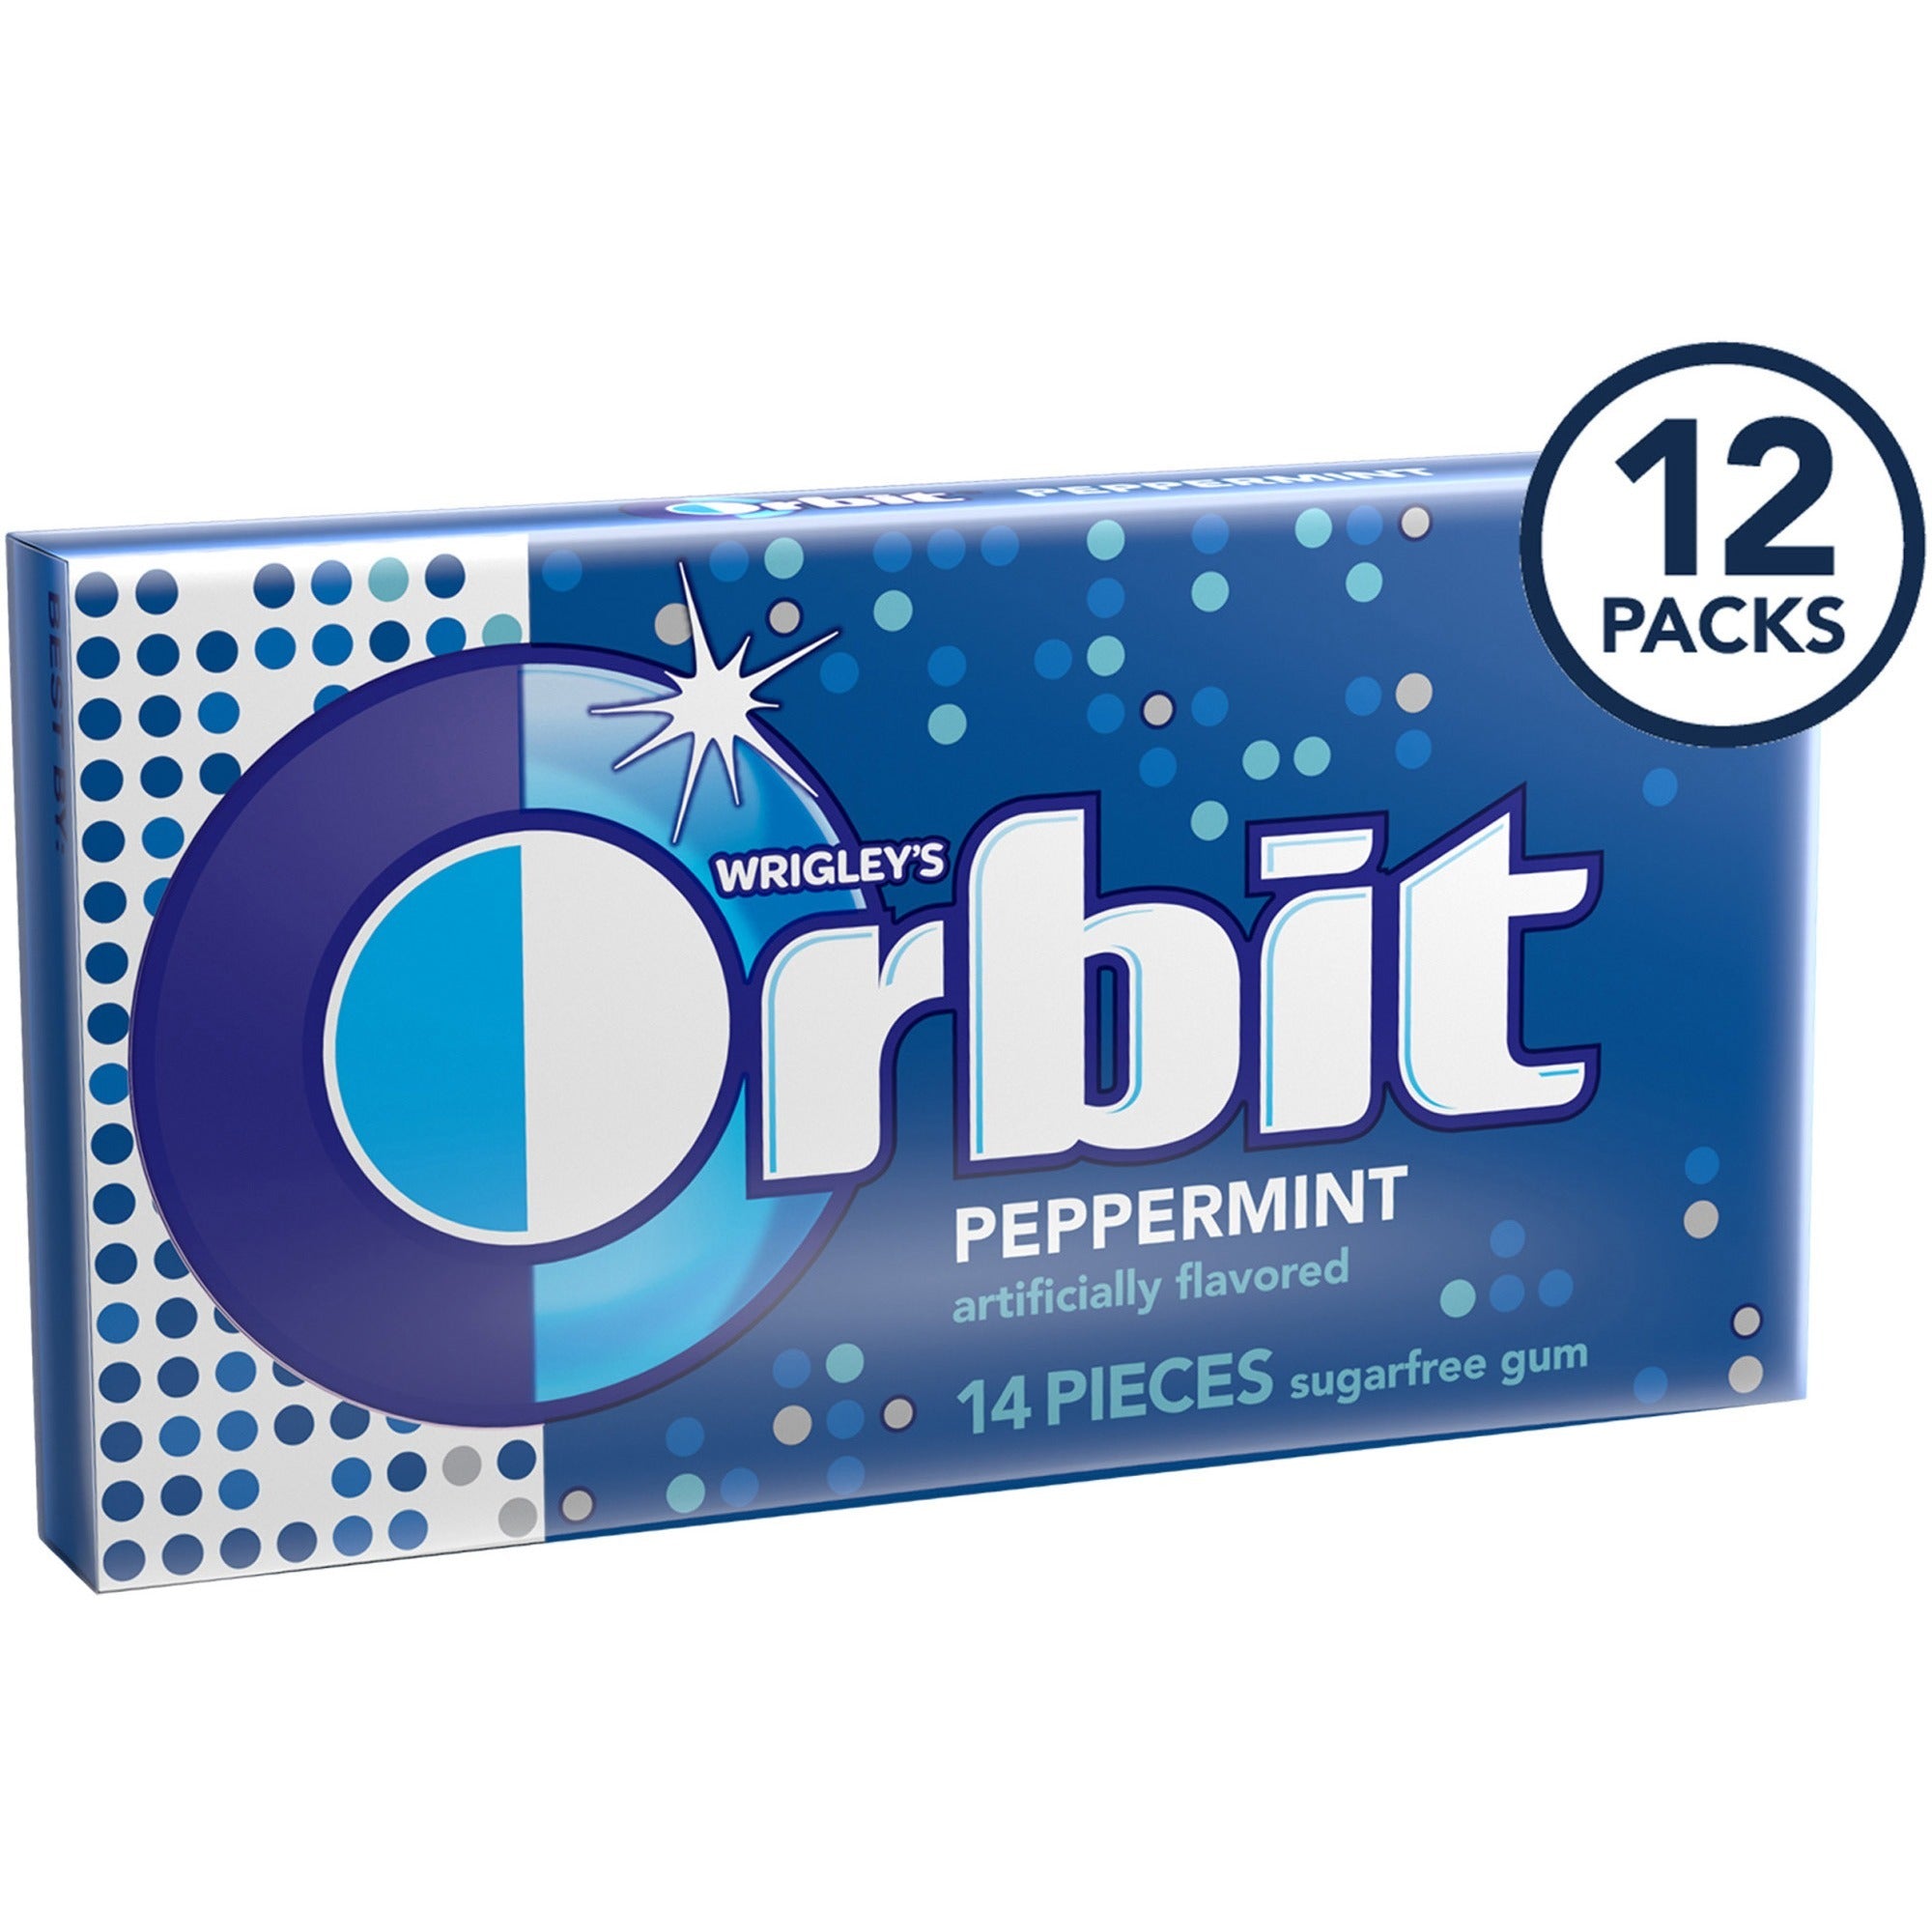 orbit-peppermint-sugarfree-gum-12-packs-peppermint-individually-wrapped-12-box_mrs21486 - 2